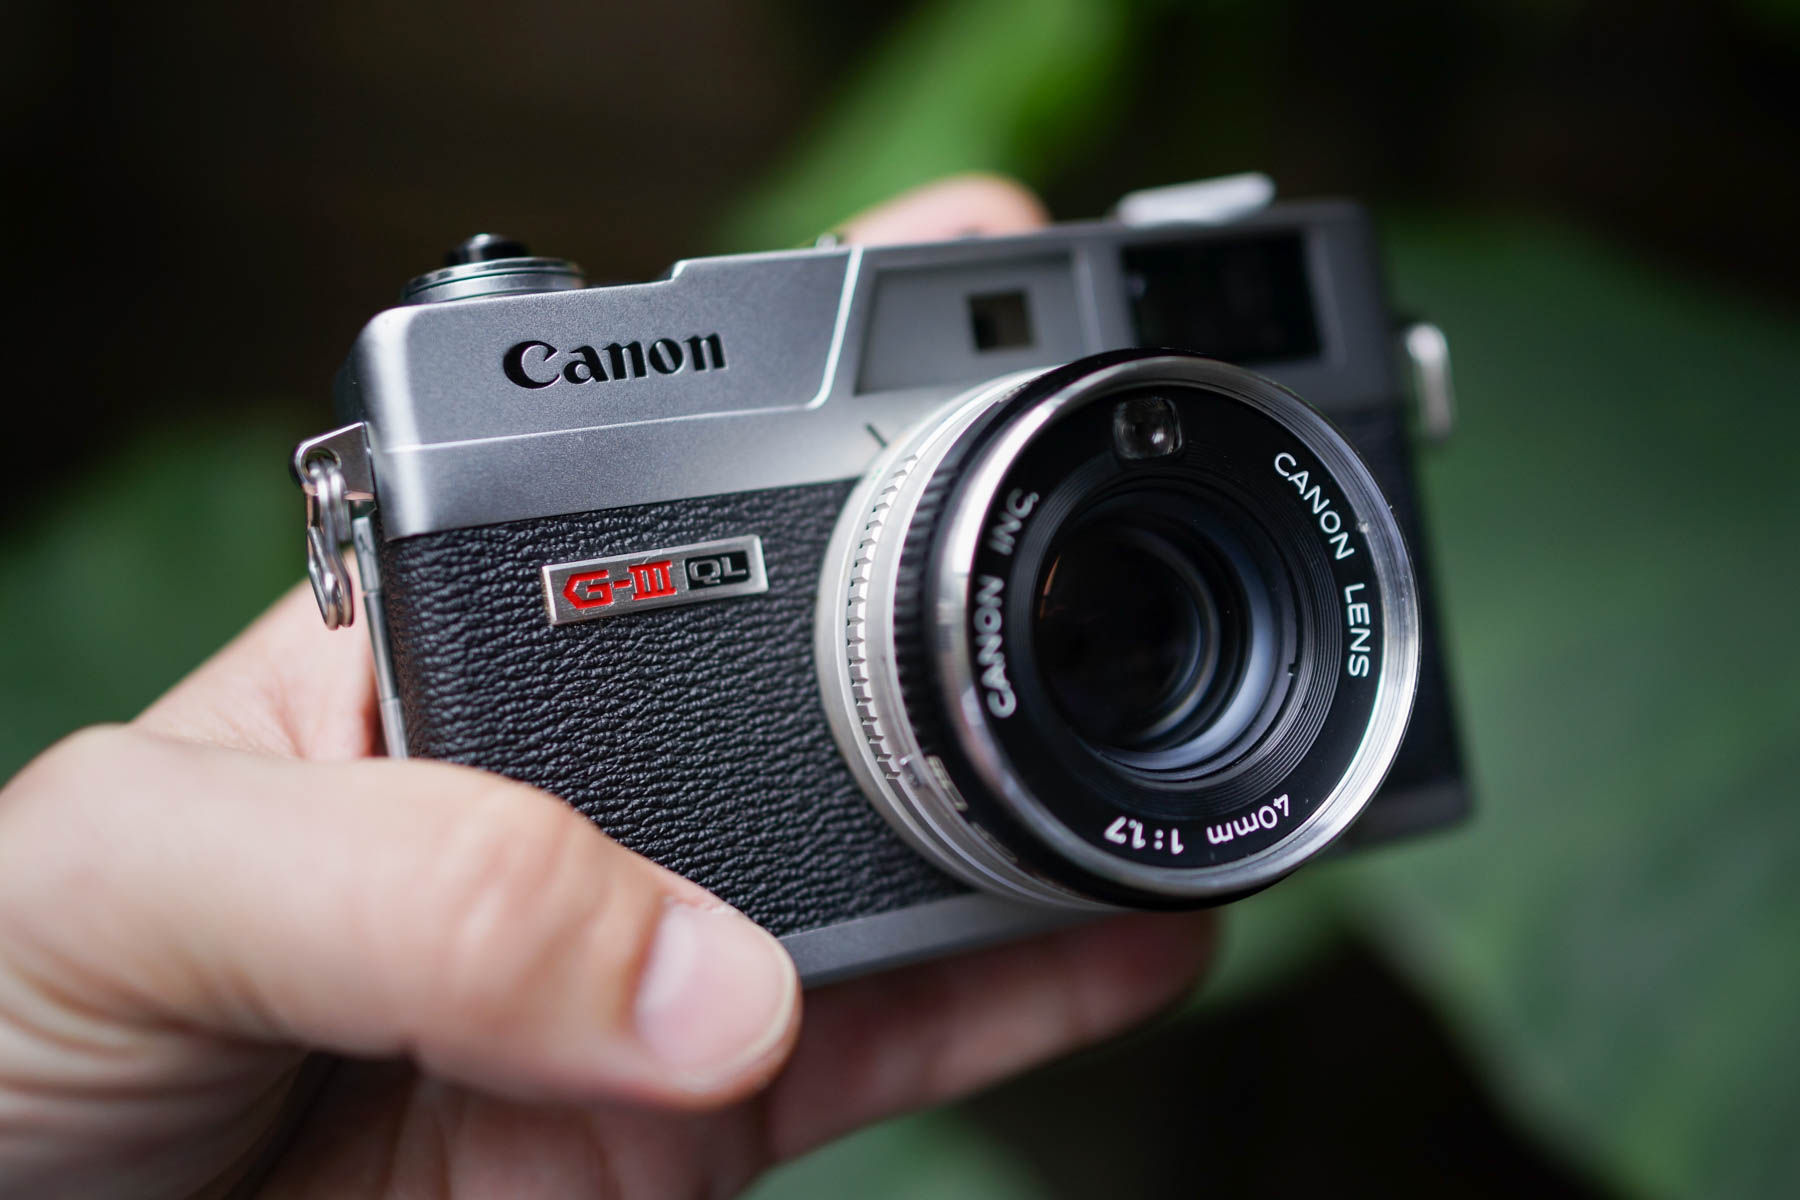 Arrival of the Canon Canonet QL17 GIII…So Excited! – SeattleSteve.me